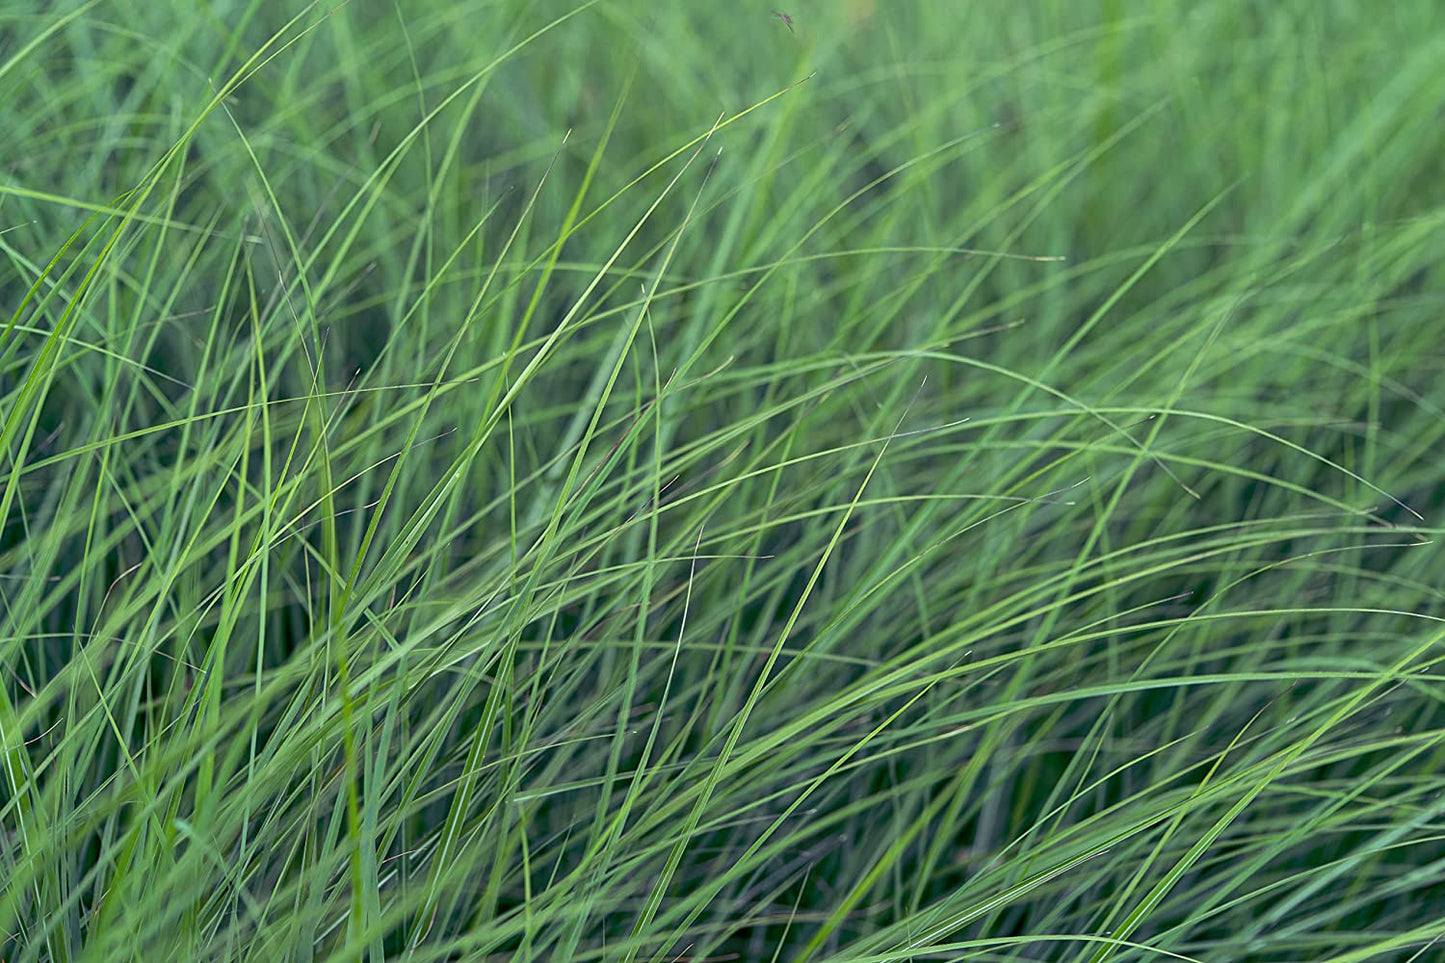 Hundredfold Blue Grama 1000 Seeds - Canada Prairie Native Grass, Excellent for No-mow Lawn & Lawn Alternative, Perfect for Wildflower Meadow, Rock Garden & Reclamation